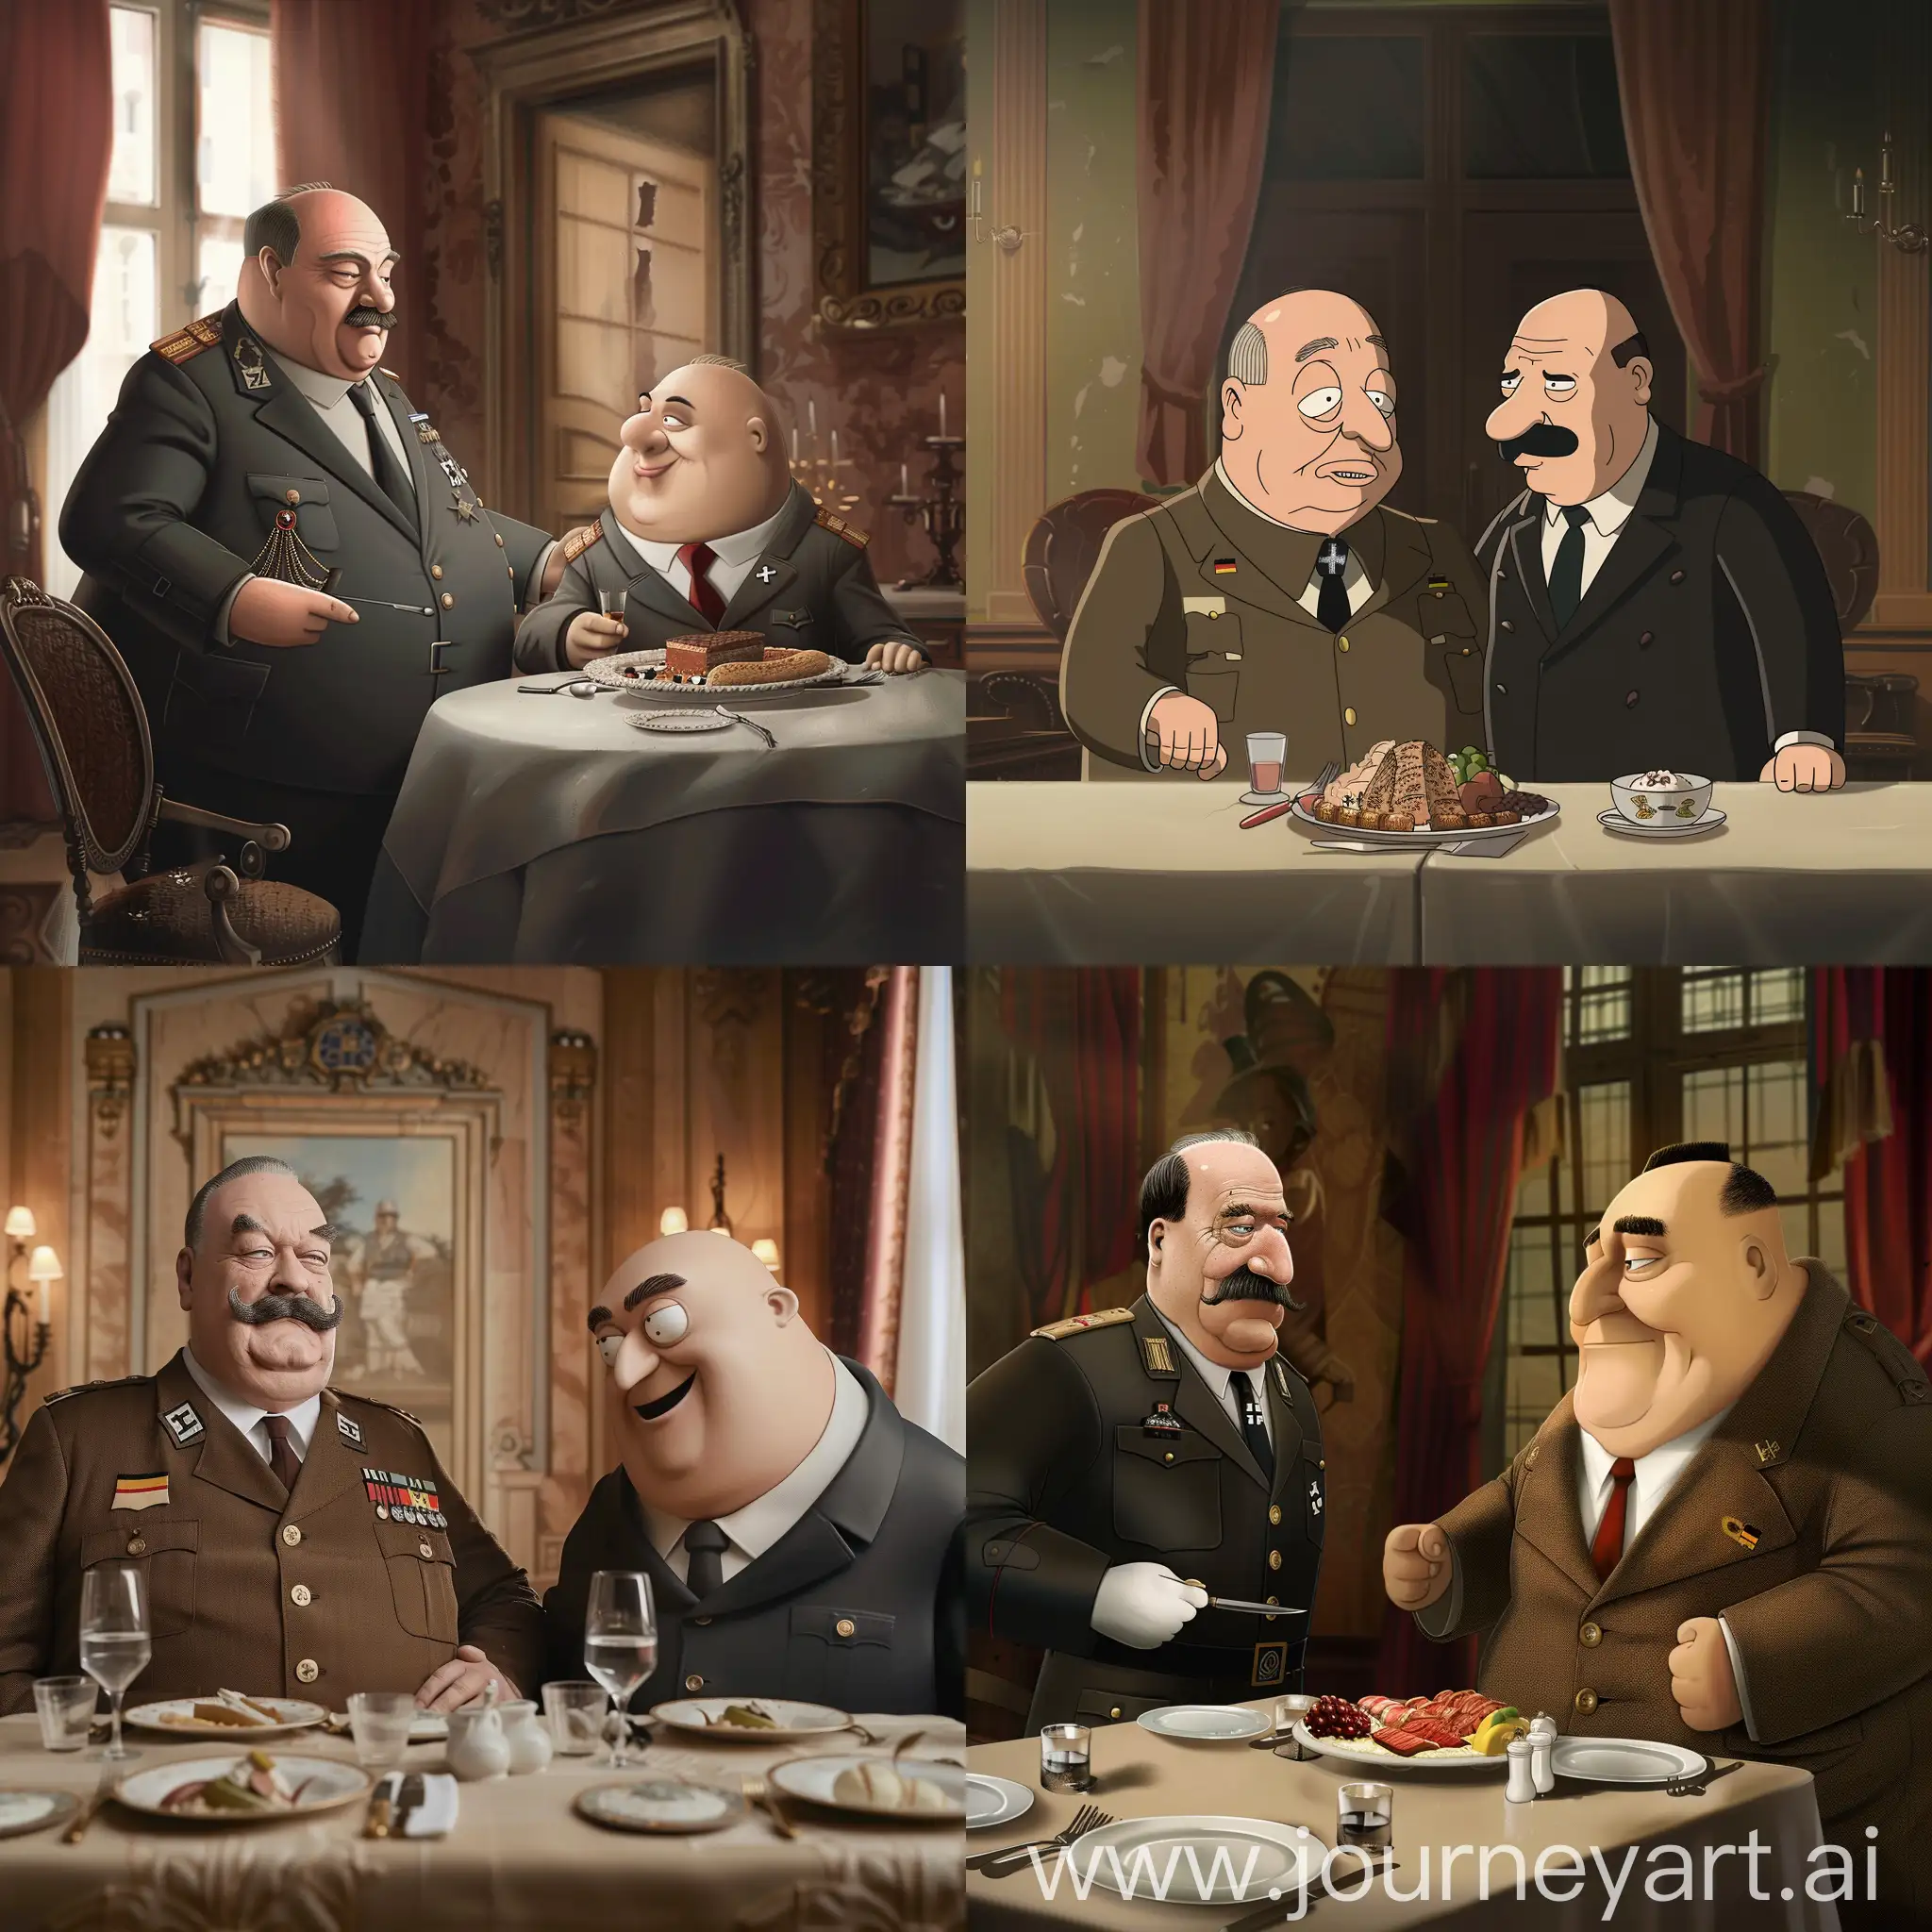 German chancellor from 1940 having a dinner with Peter Griffin 